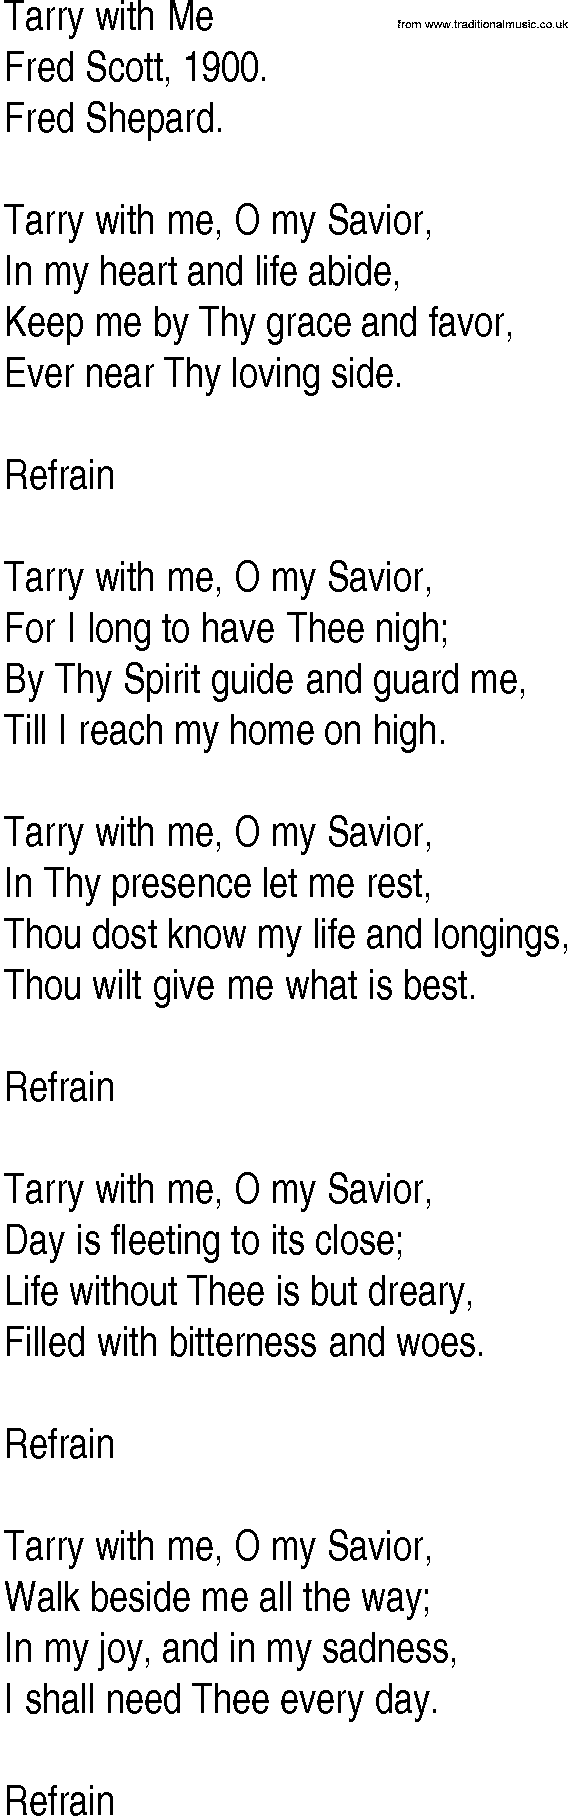 Hymn and Gospel Song: Tarry with Me by Fred Scott lyrics